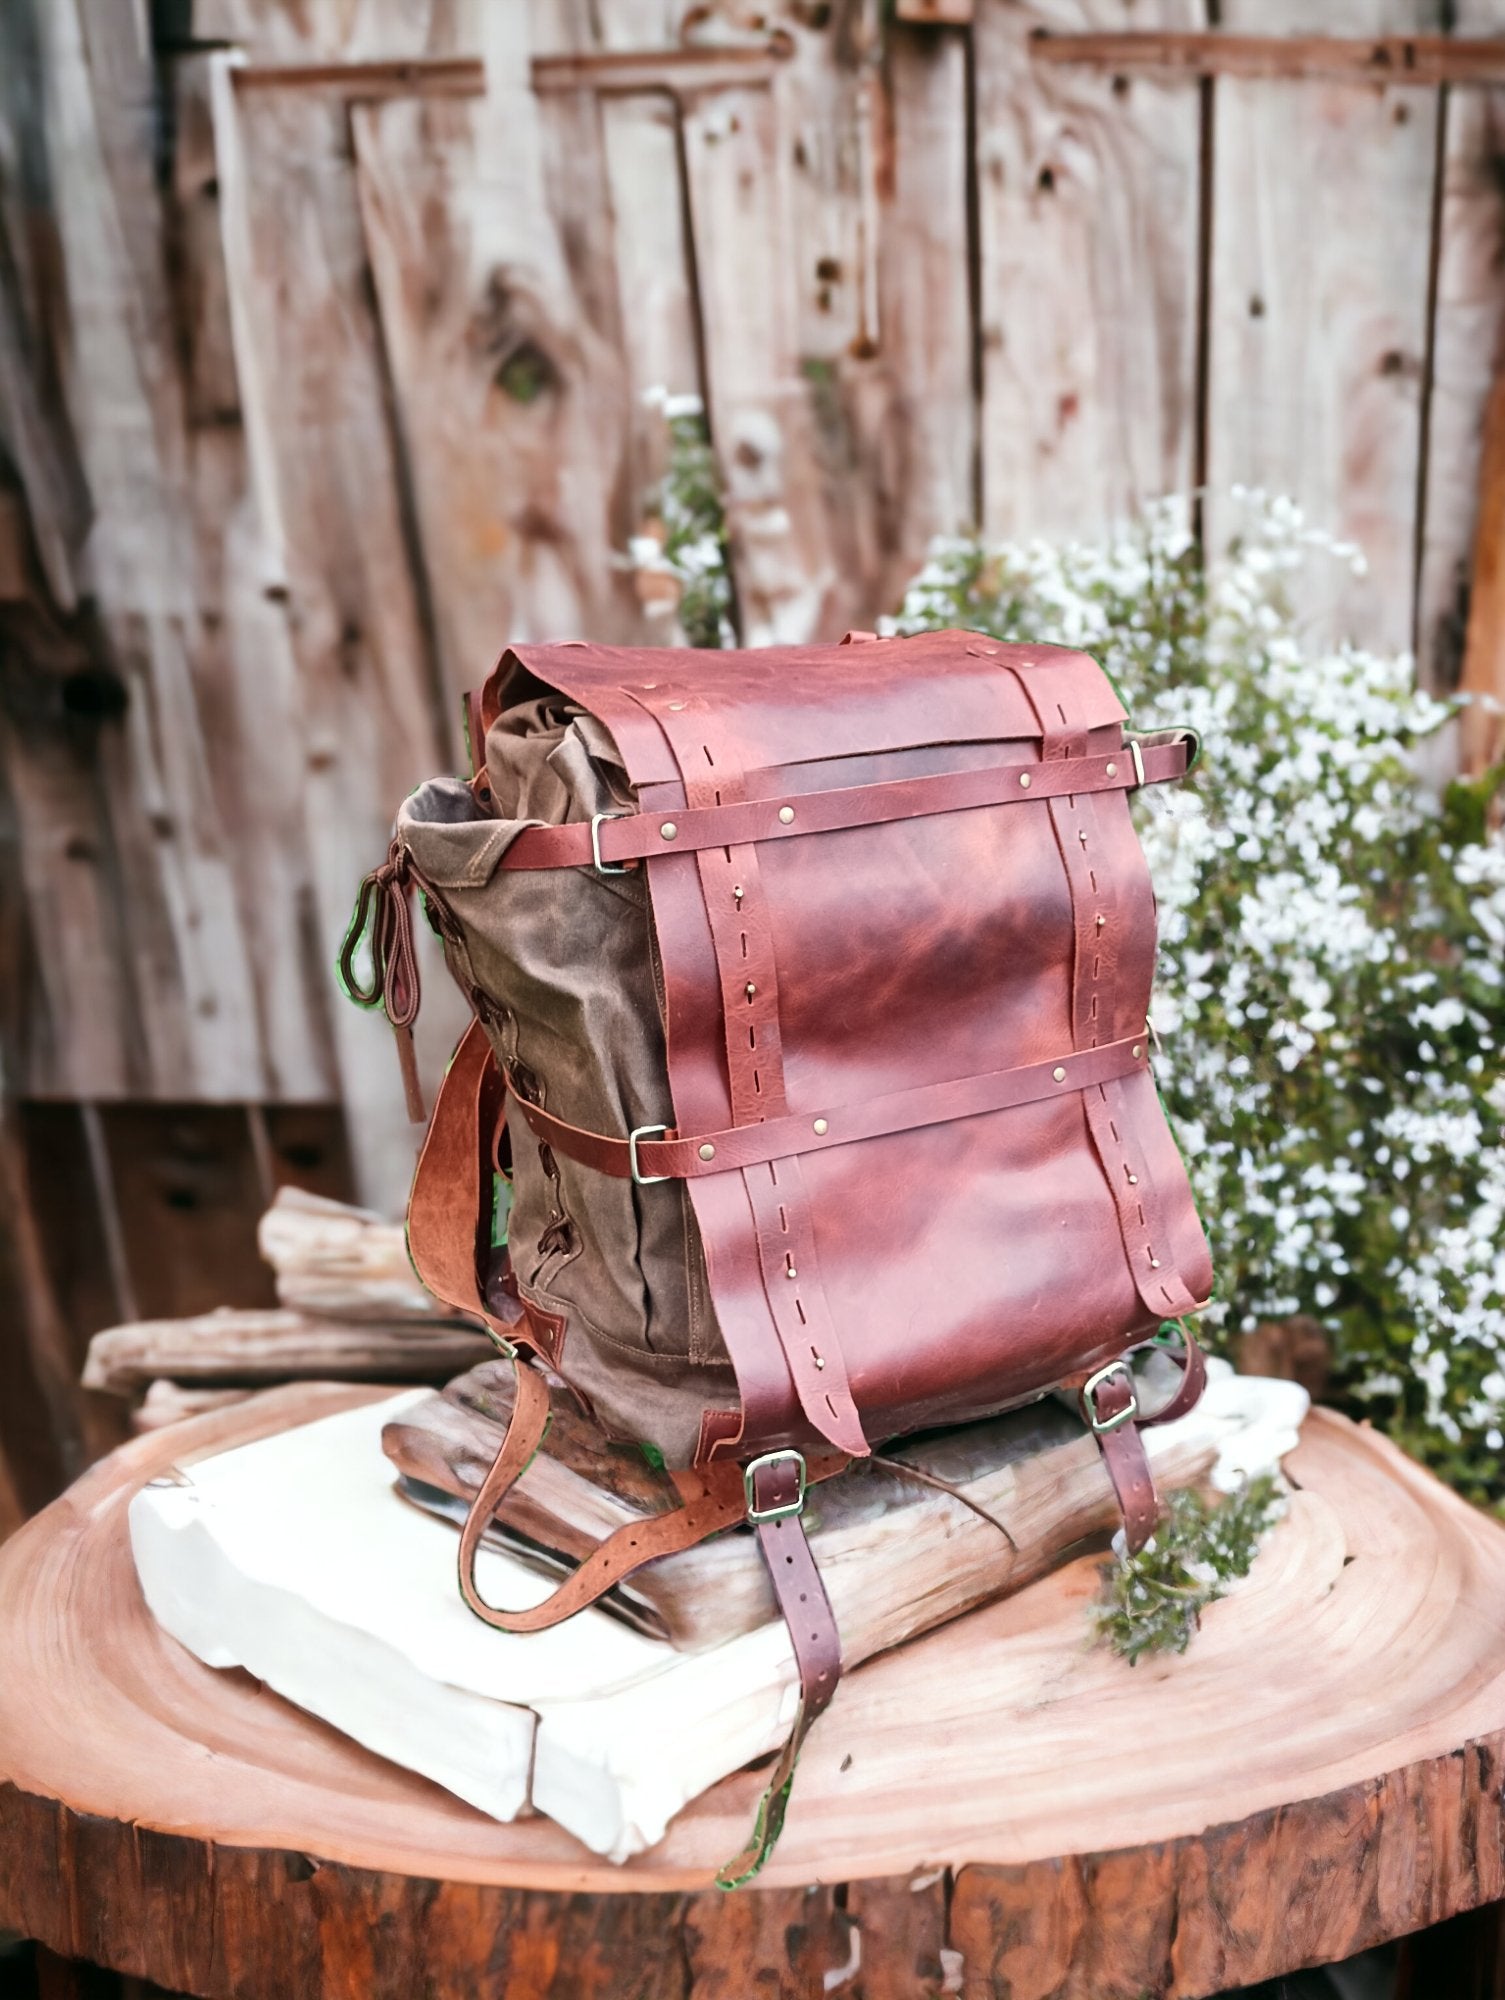 Daypack | Handmade | Leather Canvas Backpack | Brown - Beige colour options | Bushcraft Backpack | Camping Backpack | Hiking Backpack | Travel Backpack bushcraft - camping - hiking backpack 99percenthandmade   